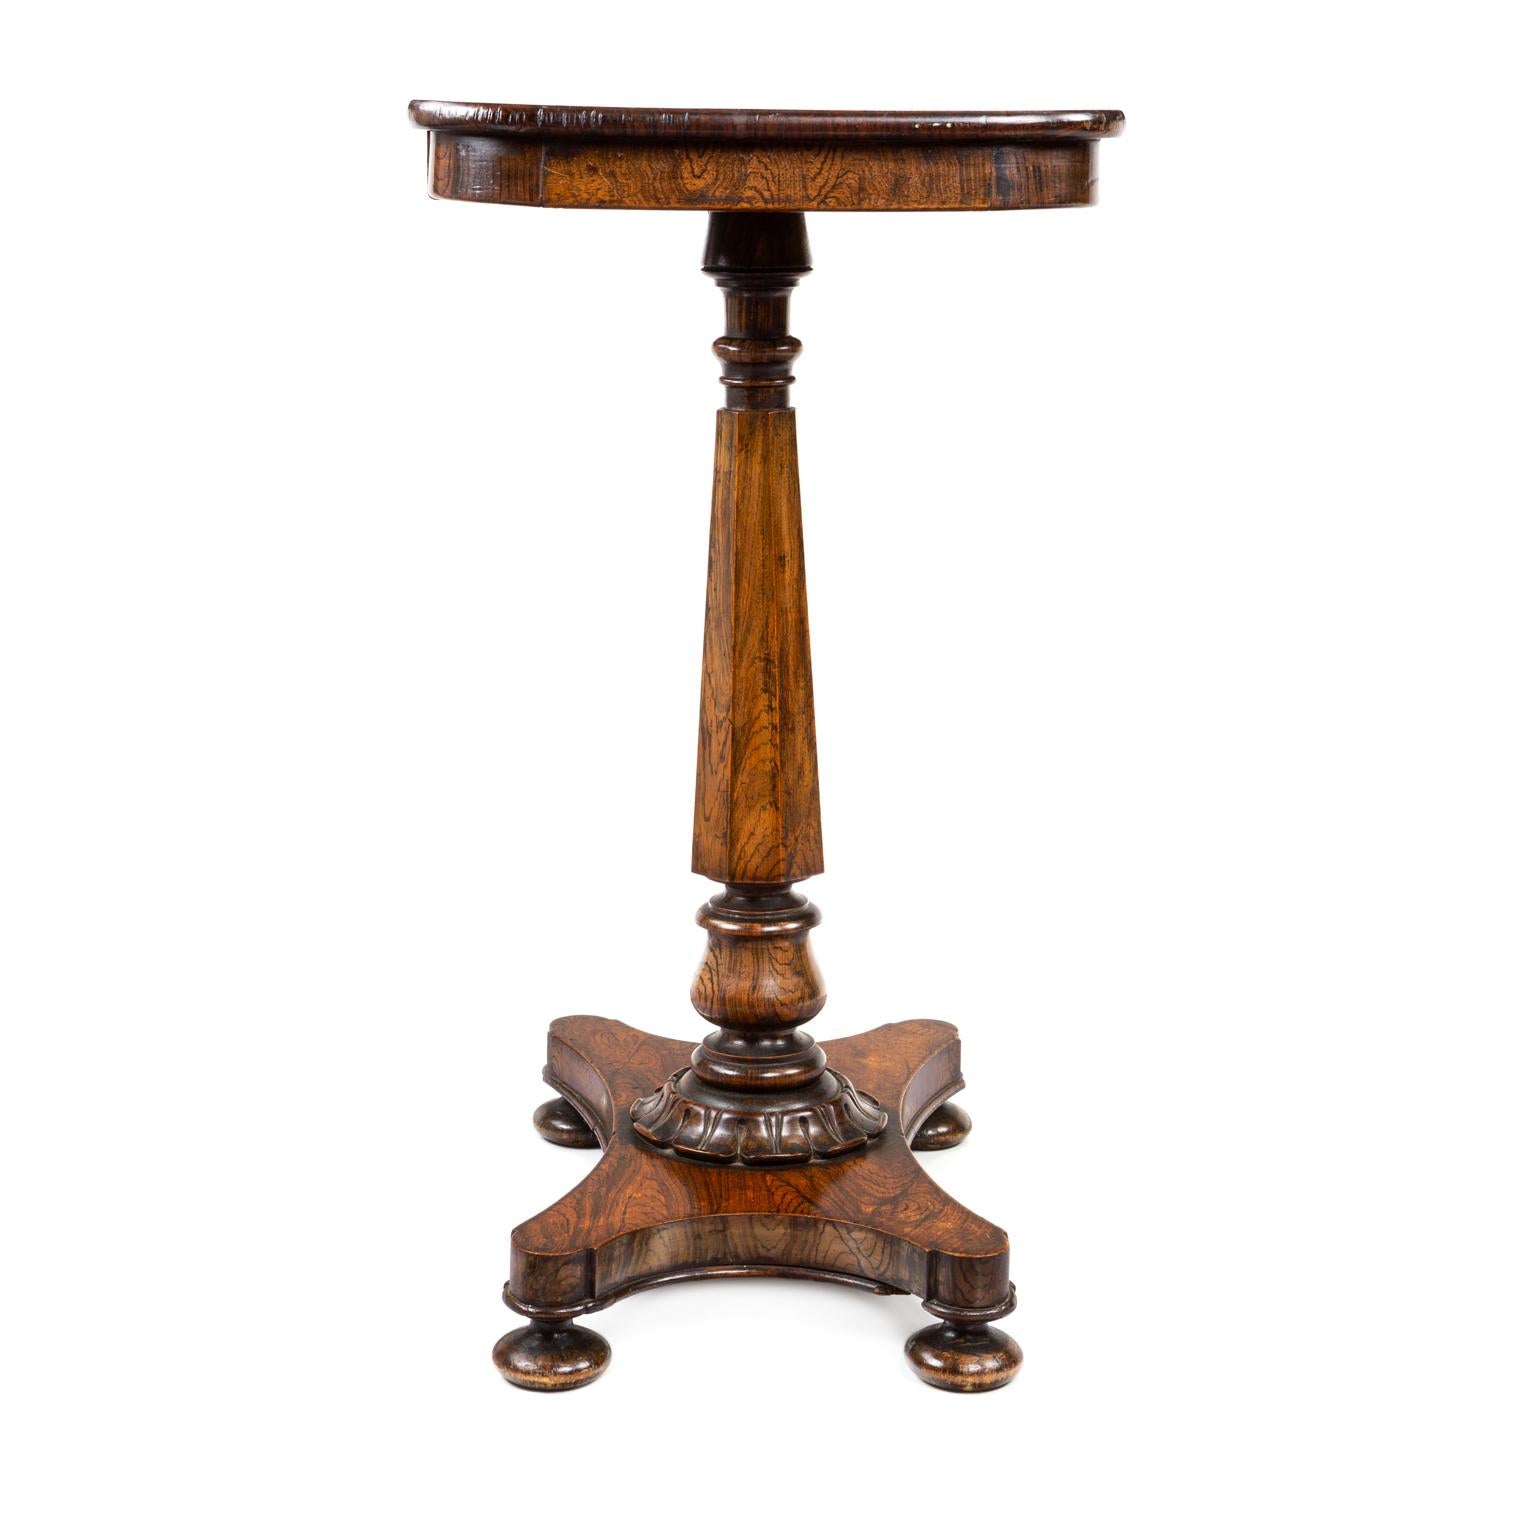 British Small and Attractive Regency Pedestal Table Attributed to Gillows of Lancaster